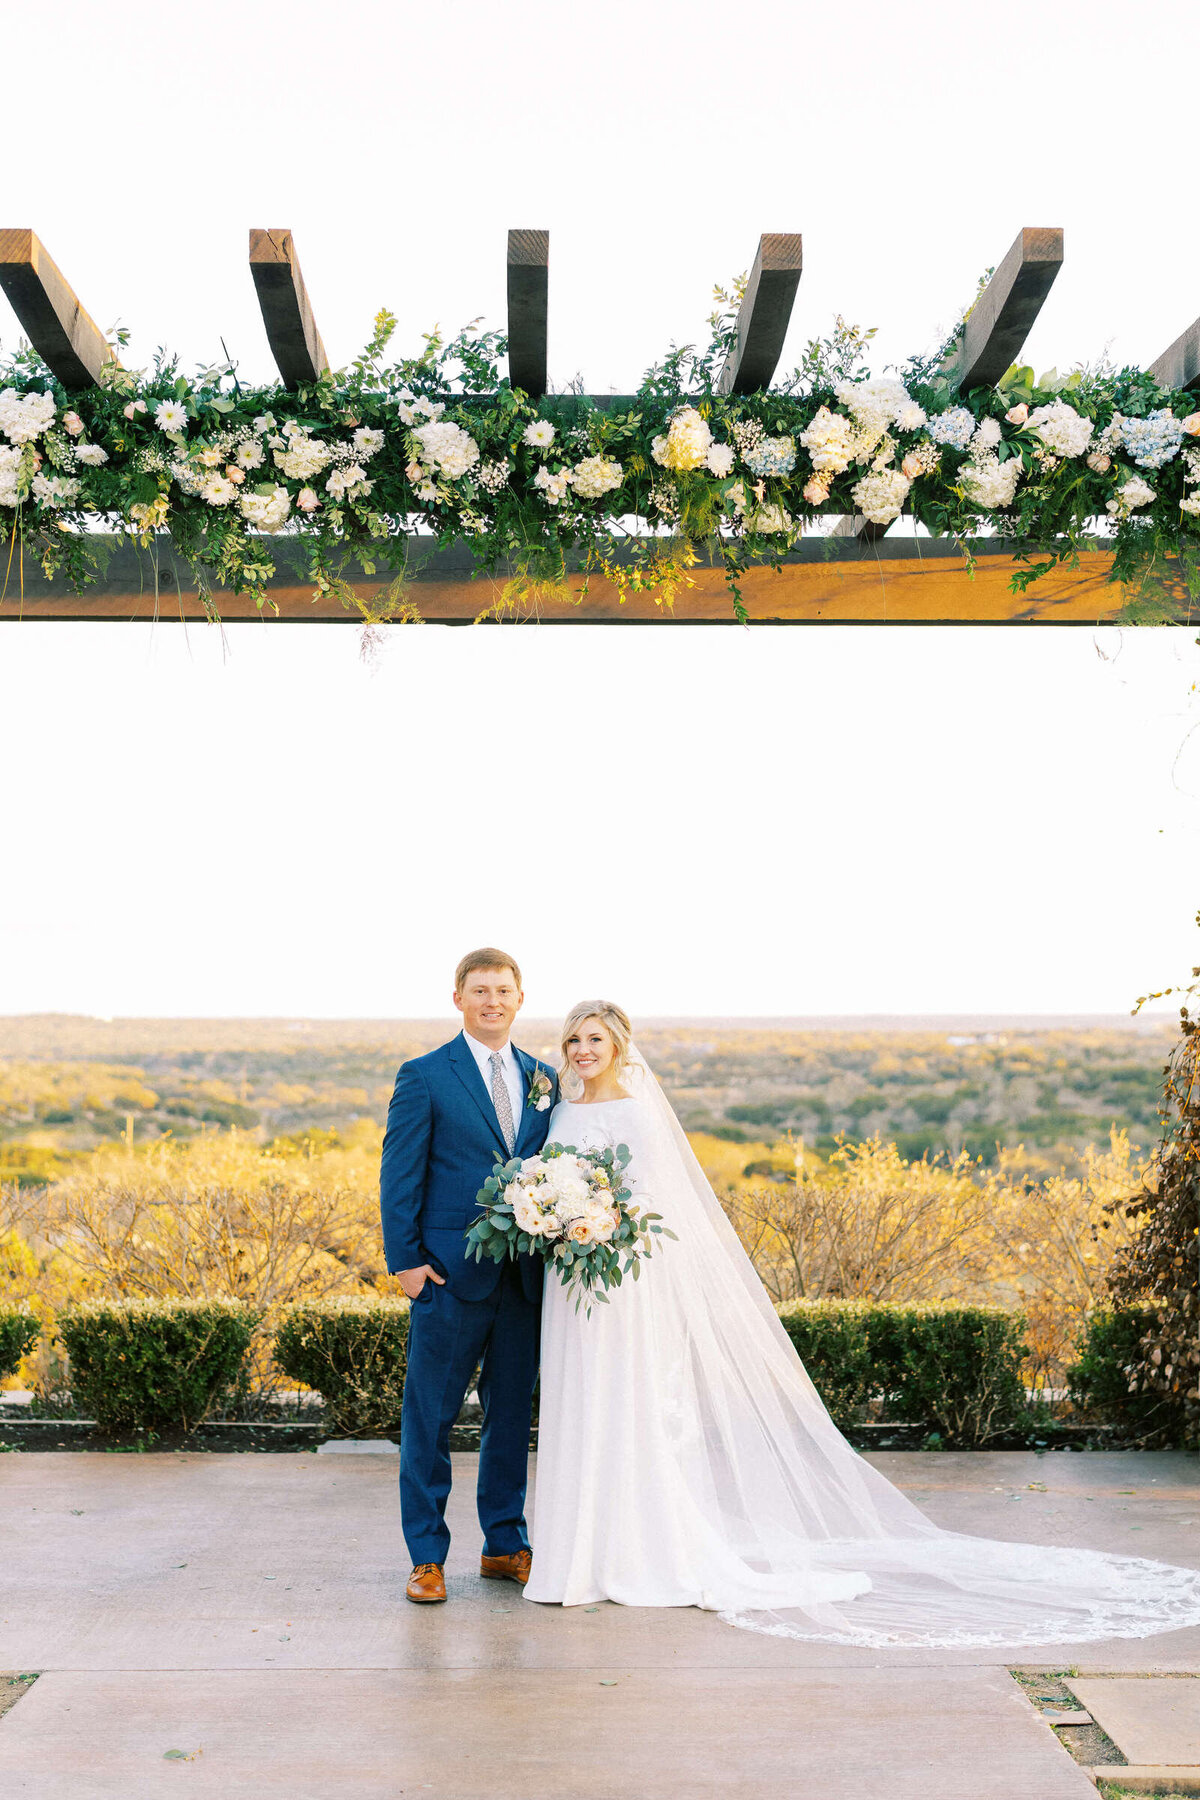 Central Texas couple poses at their wedding in Dripping Springs